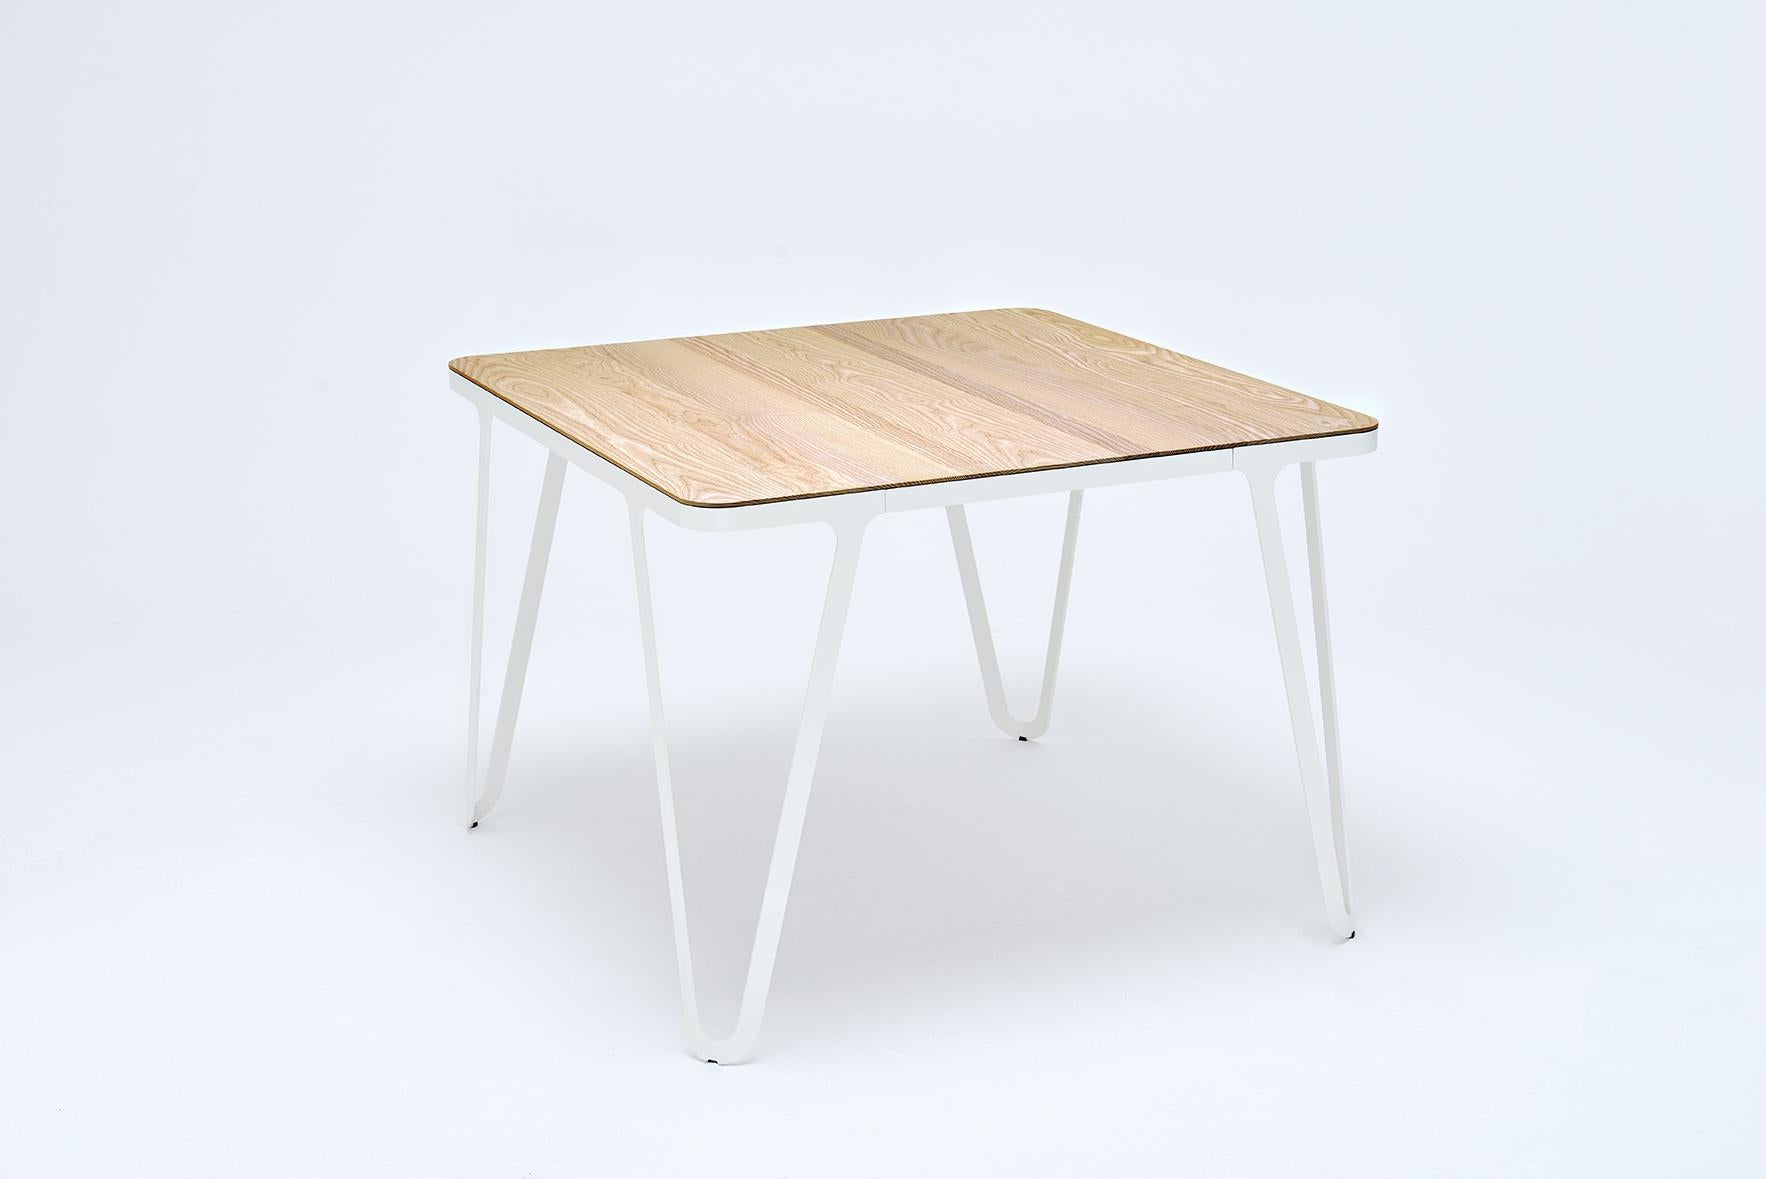 Loop Table 90 walnut by Sebastian Scherer
Dimensions: D90 x W90 x H74 cm
Materials: Walnut, Aluminium, Wood
Weight: 37 kg
Also Available: Colours:Solid wood (matt lacquered or oiled): black and white stained ash / natural oak / american